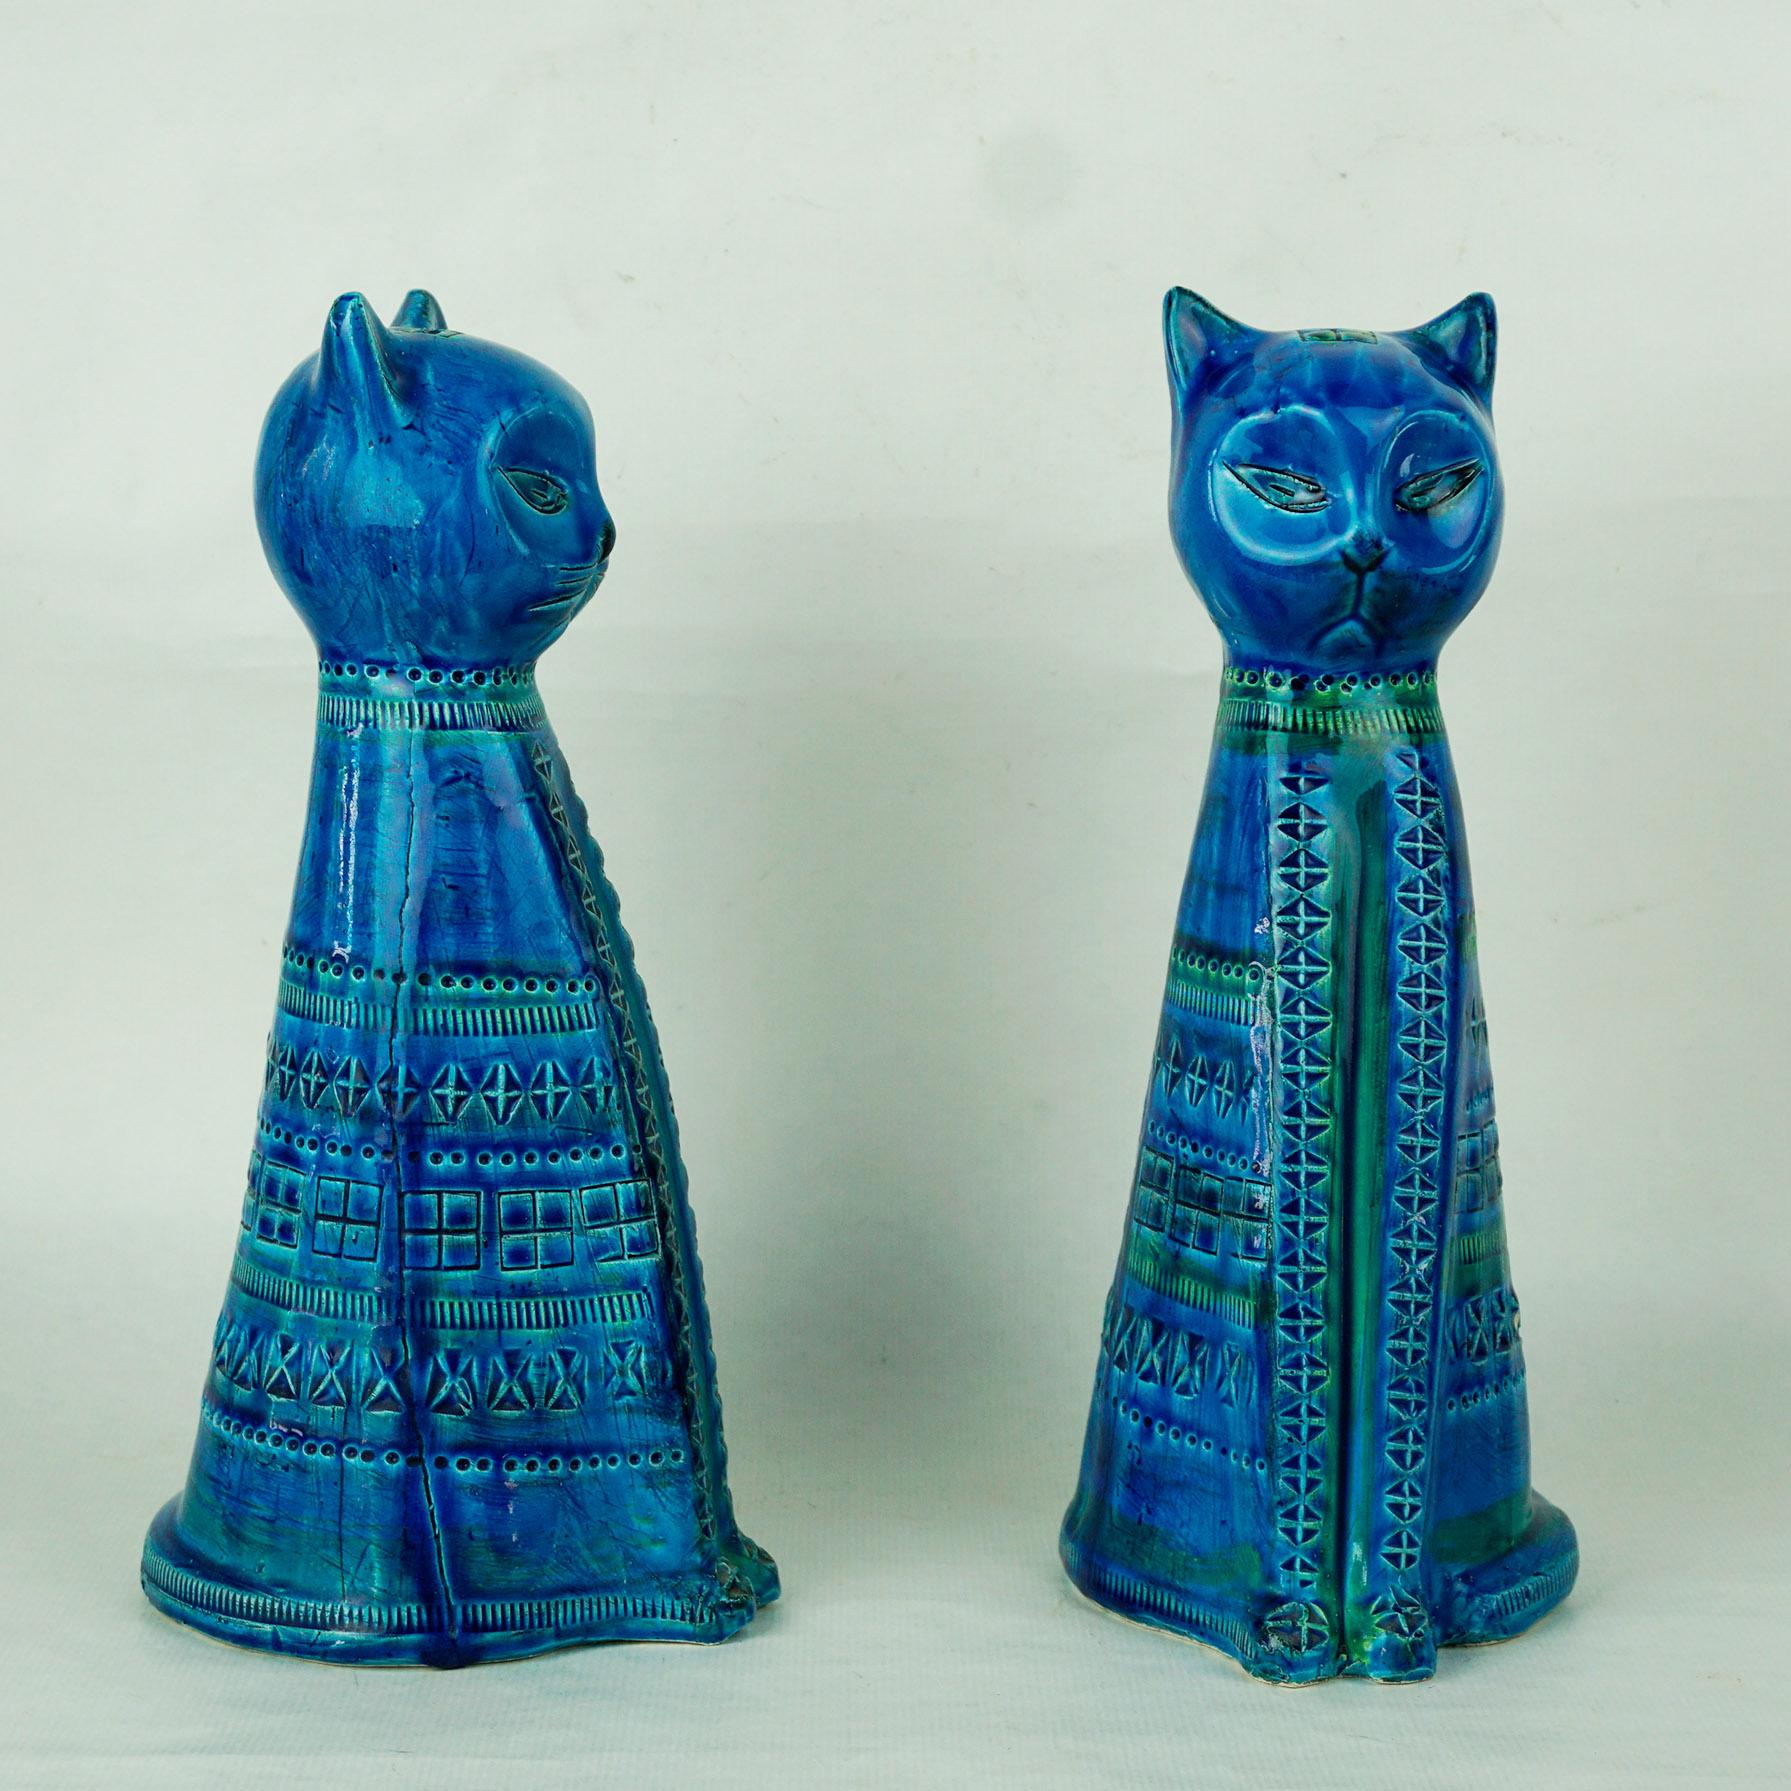 Charming iconic and Huge Italian modern ceramic cat sculpture from the Rimini Blue series designed by Aldo Londi for Bitossi Italy. Marked Flavia Montelupo Italy on the underside.
The Italian Ceramic Artist Aldo Londi from Montelupo became Art